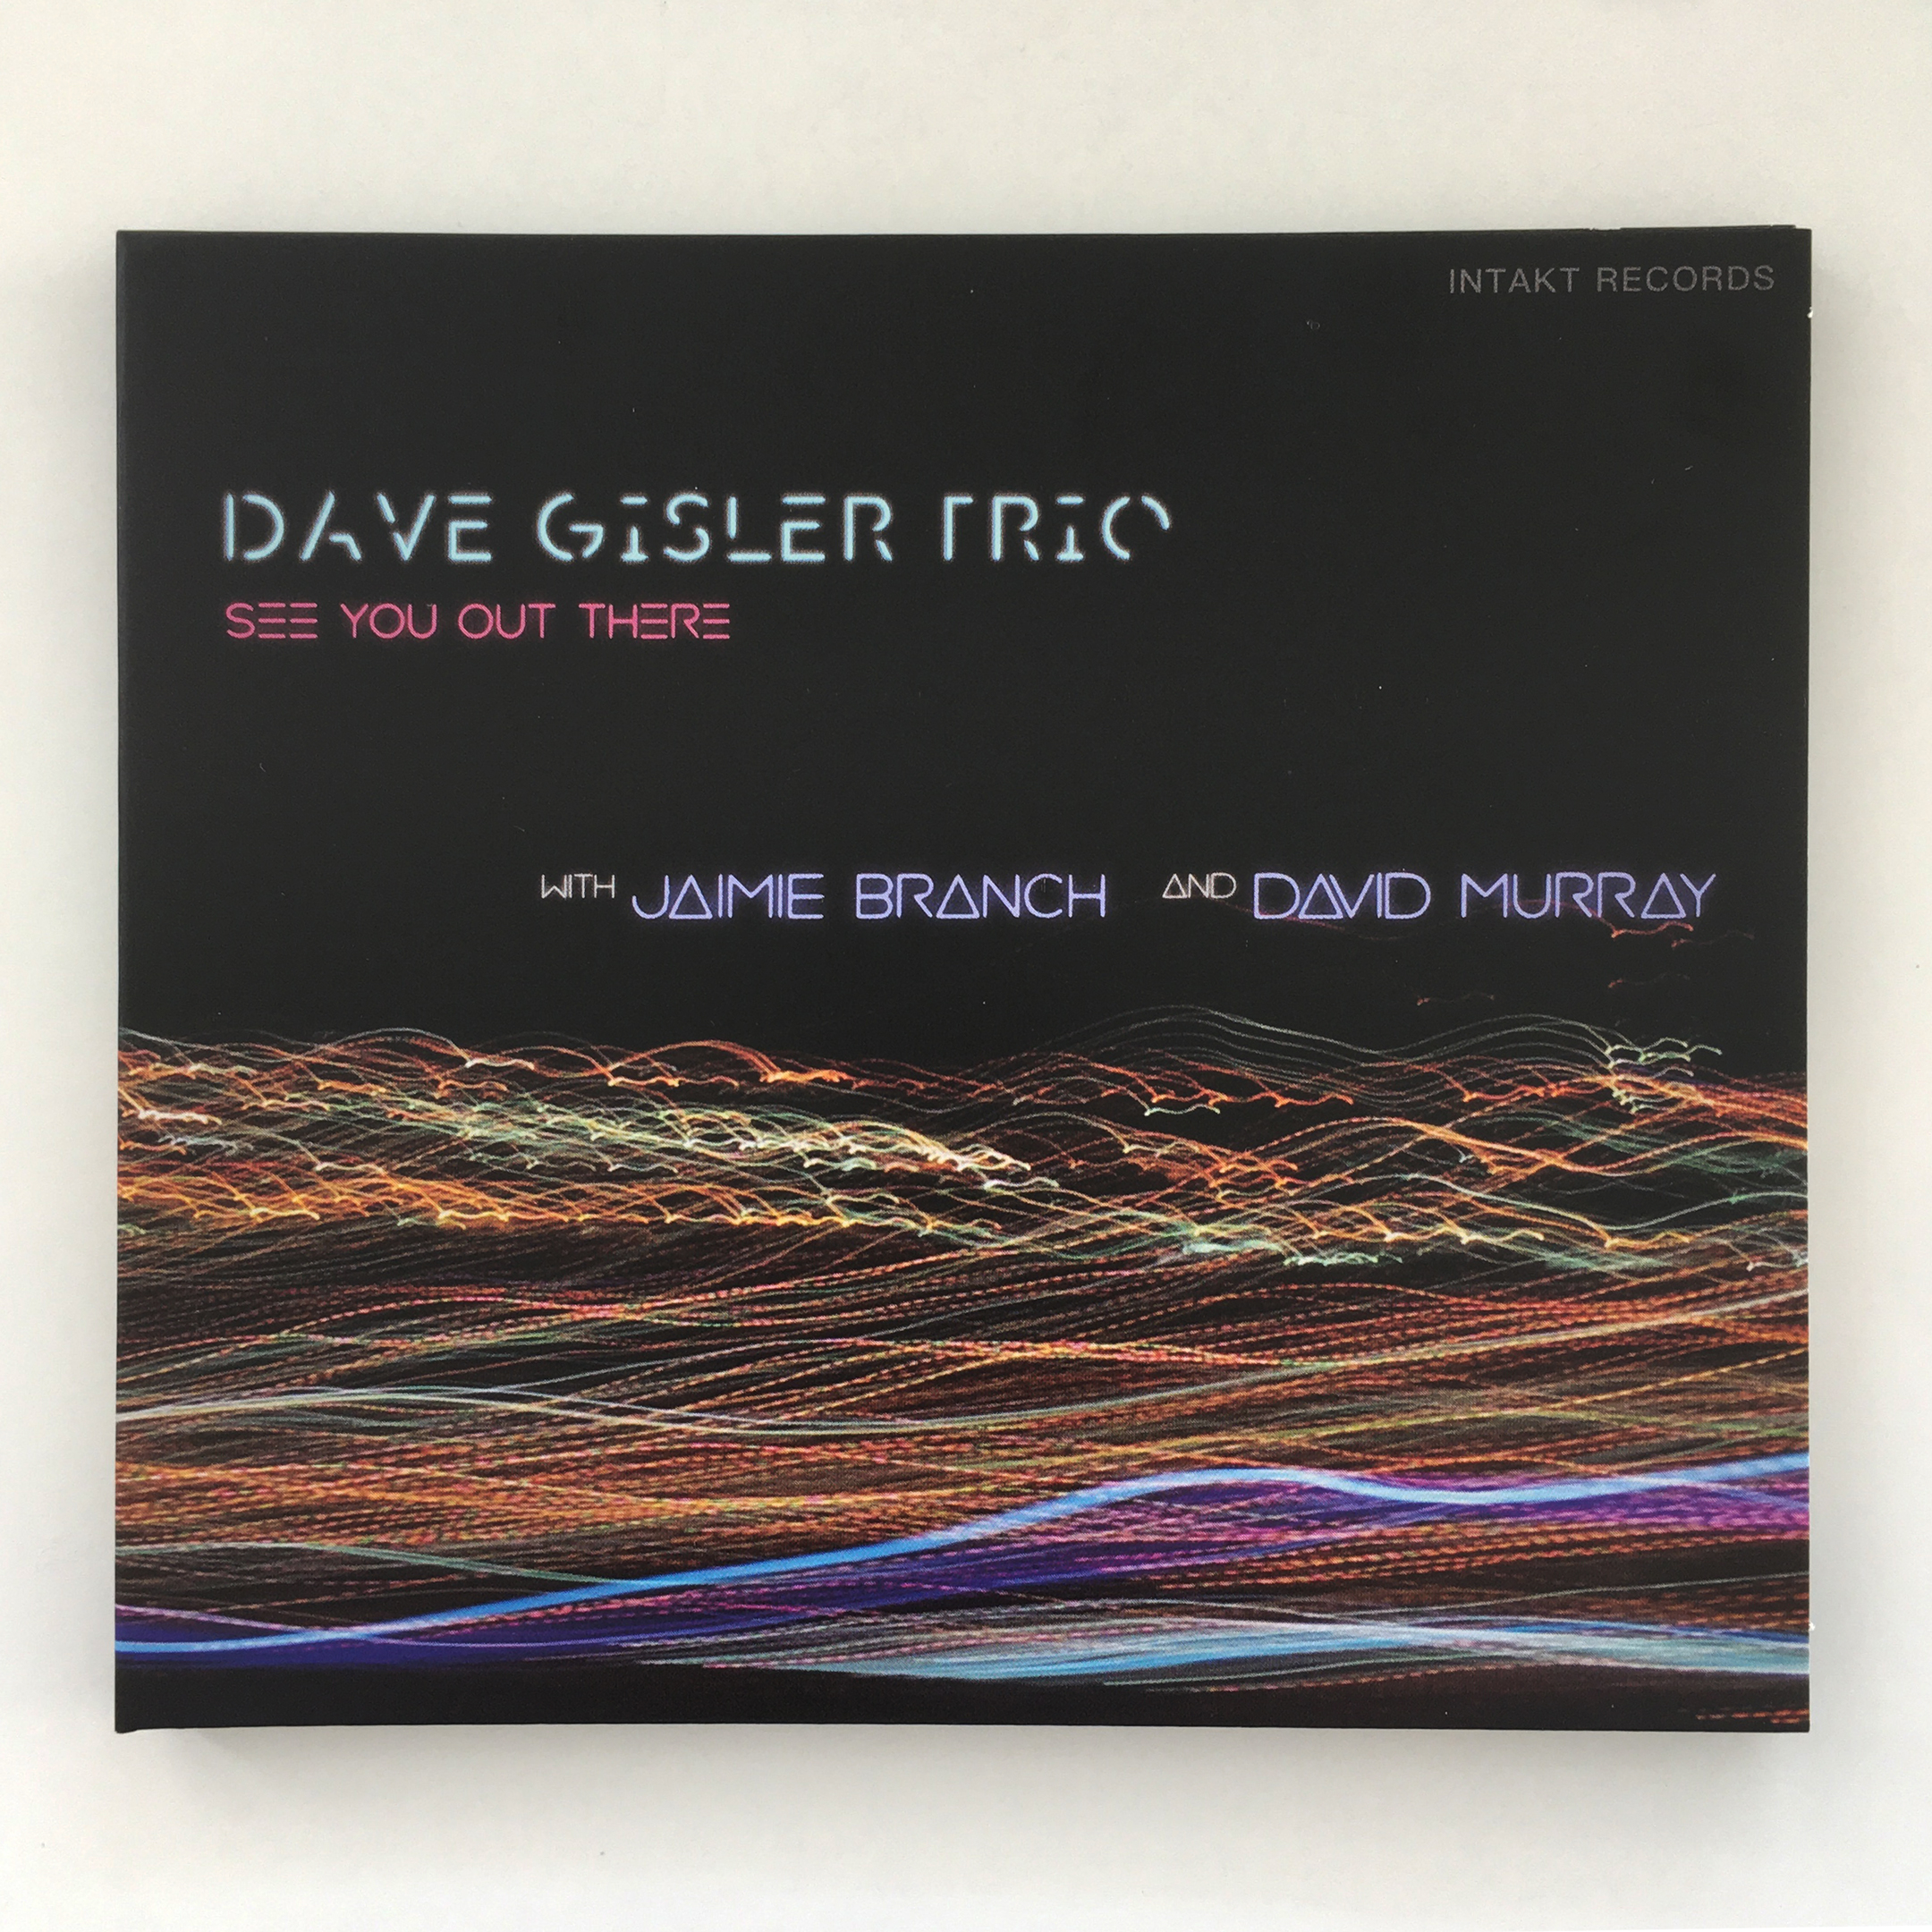 DAVE GISLER TRIO  WITH JAIMIE BRANCH AND DAVID MURRAY